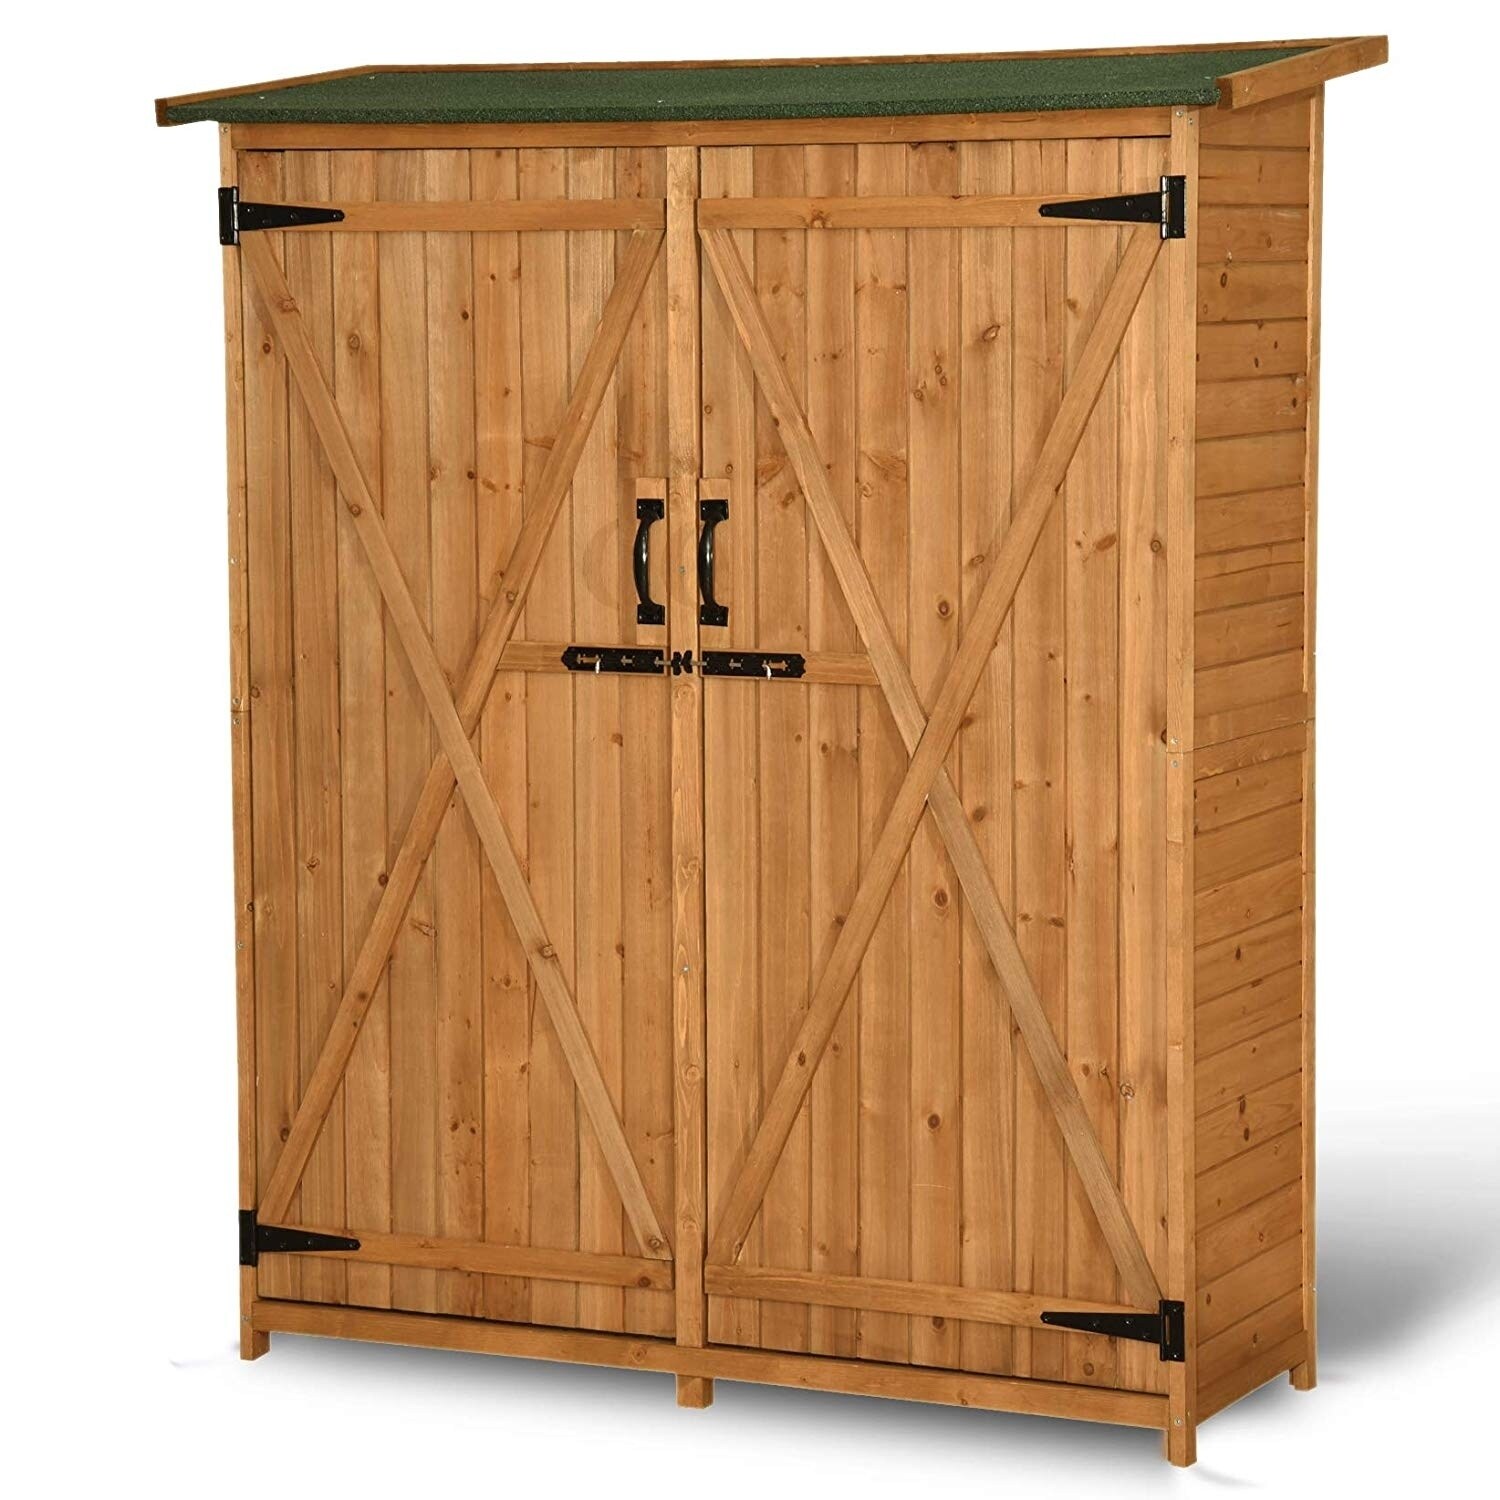 Shop Mcombo 64inch Tall Fir Wooden Shed Garden Storage Sheds Tool